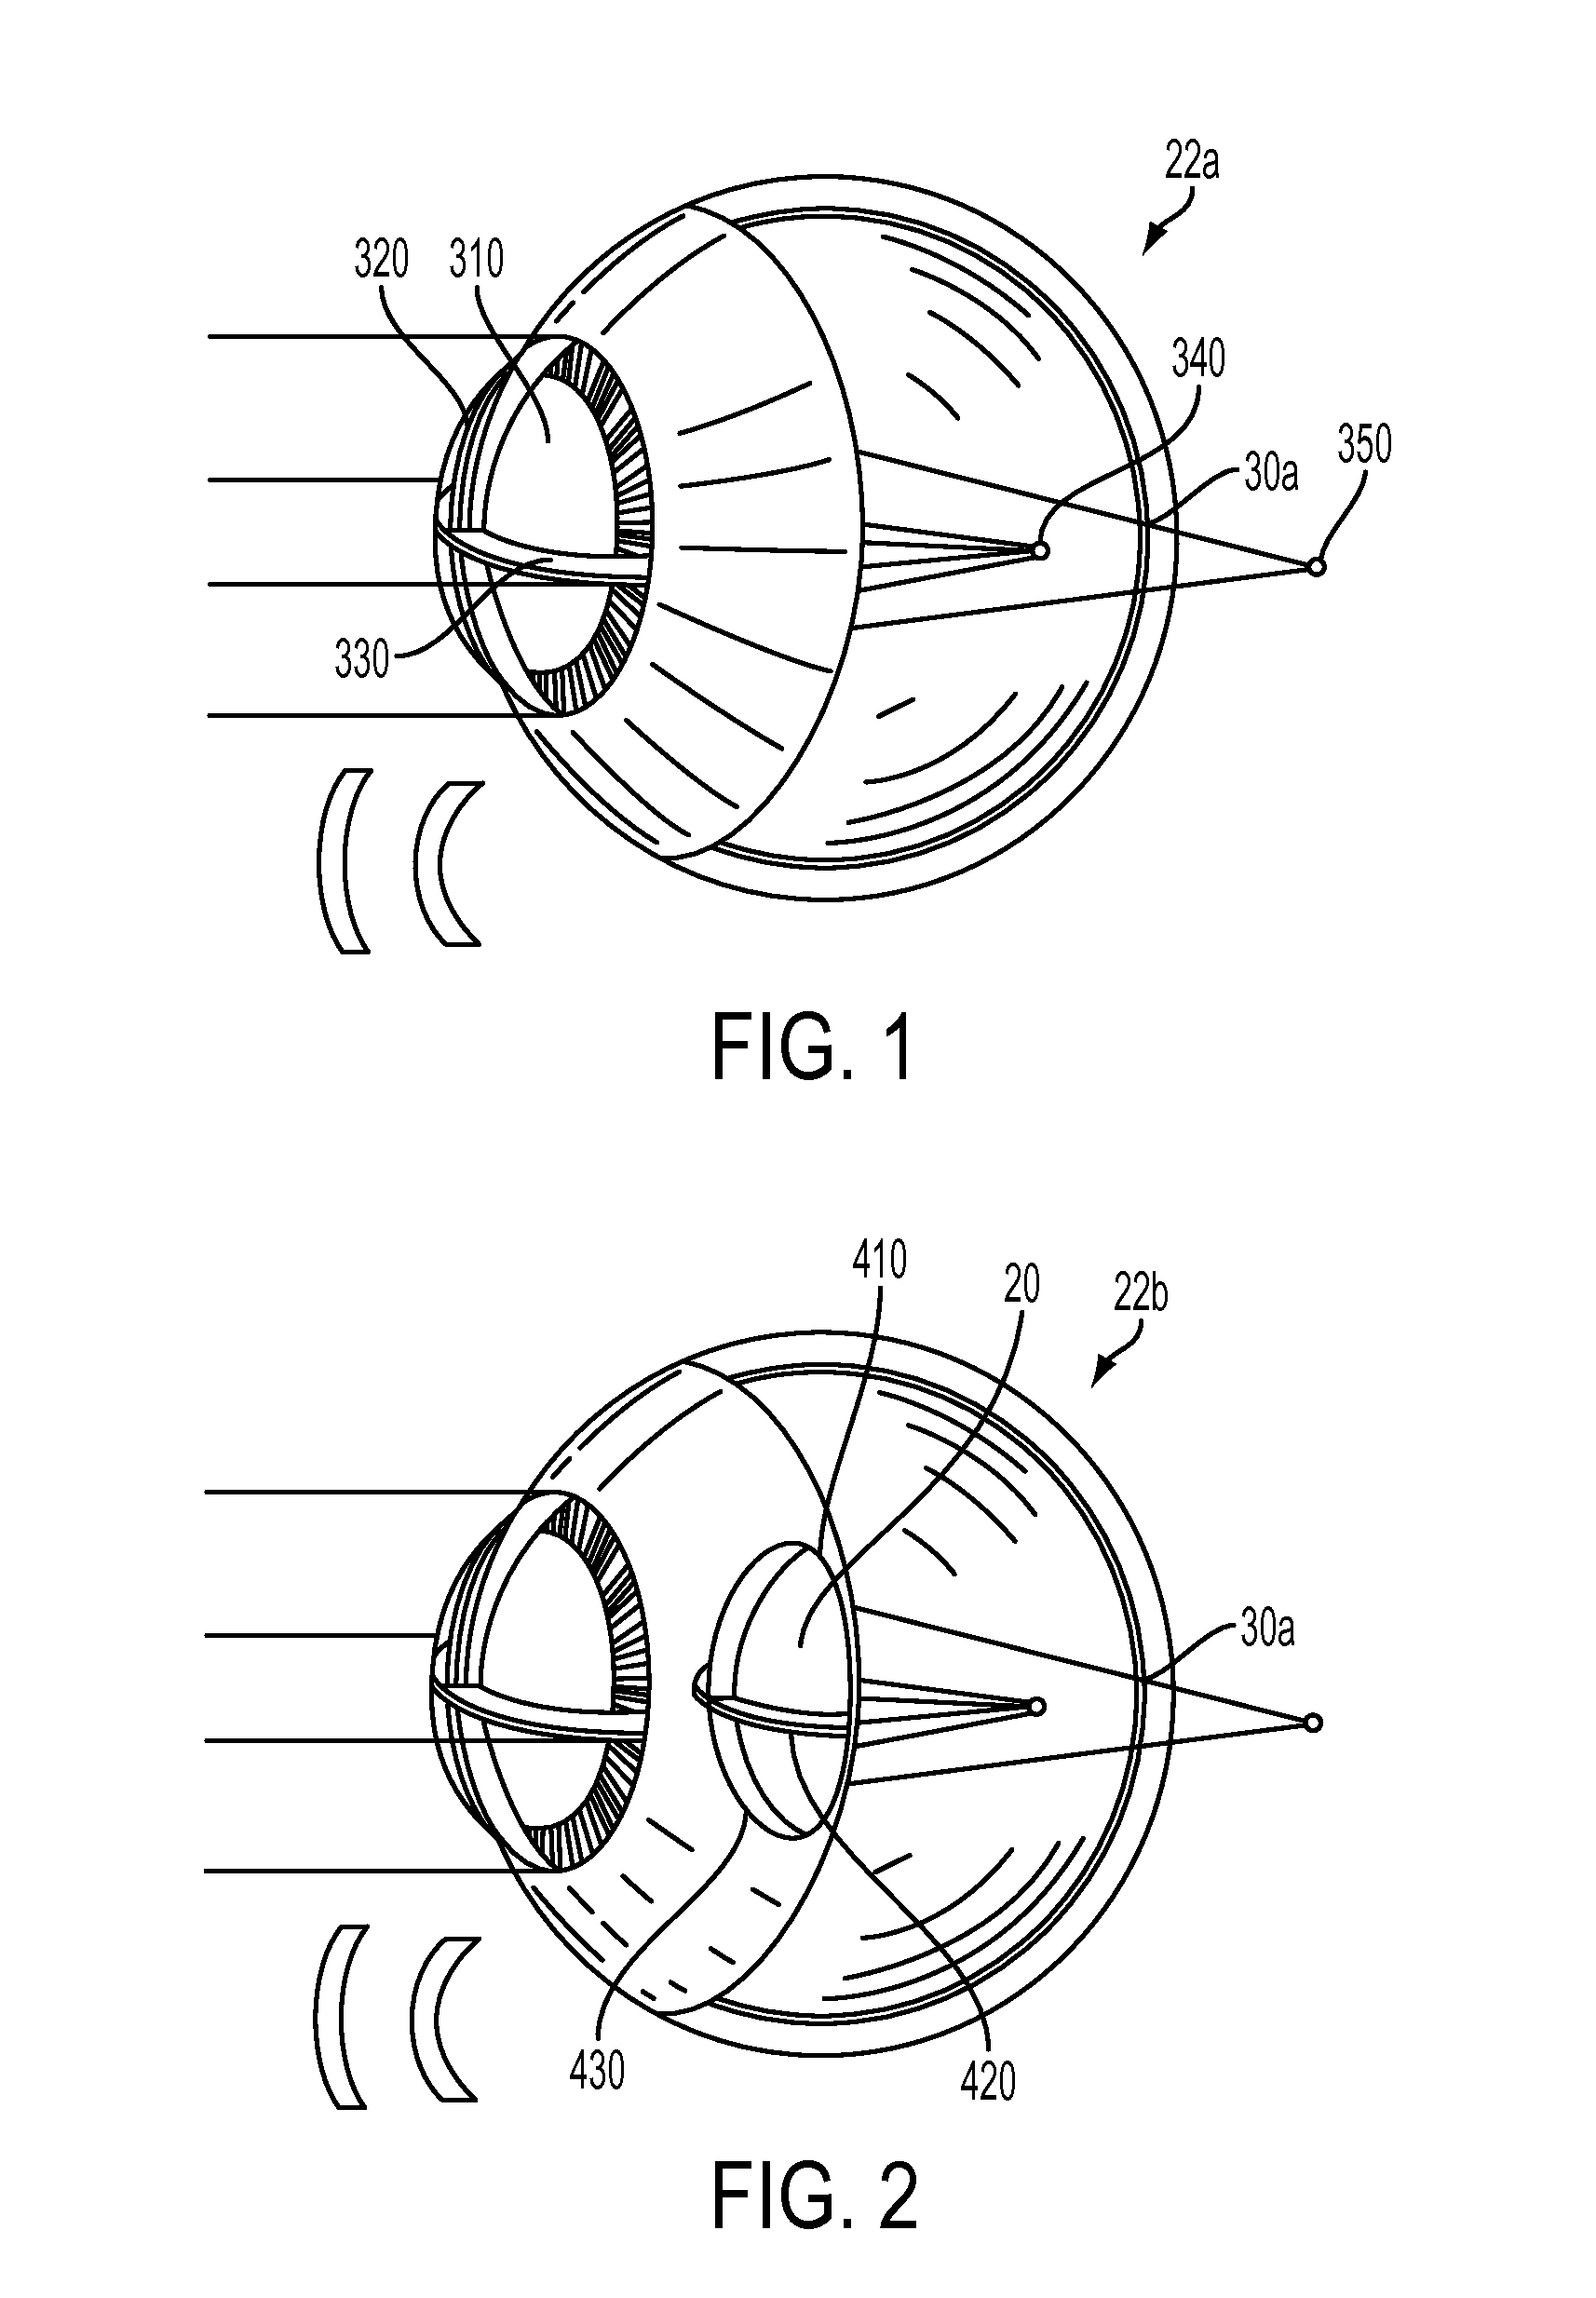 Ophthalmic lens, systems and methods having at least one rotationally asymmetric diffractive structure